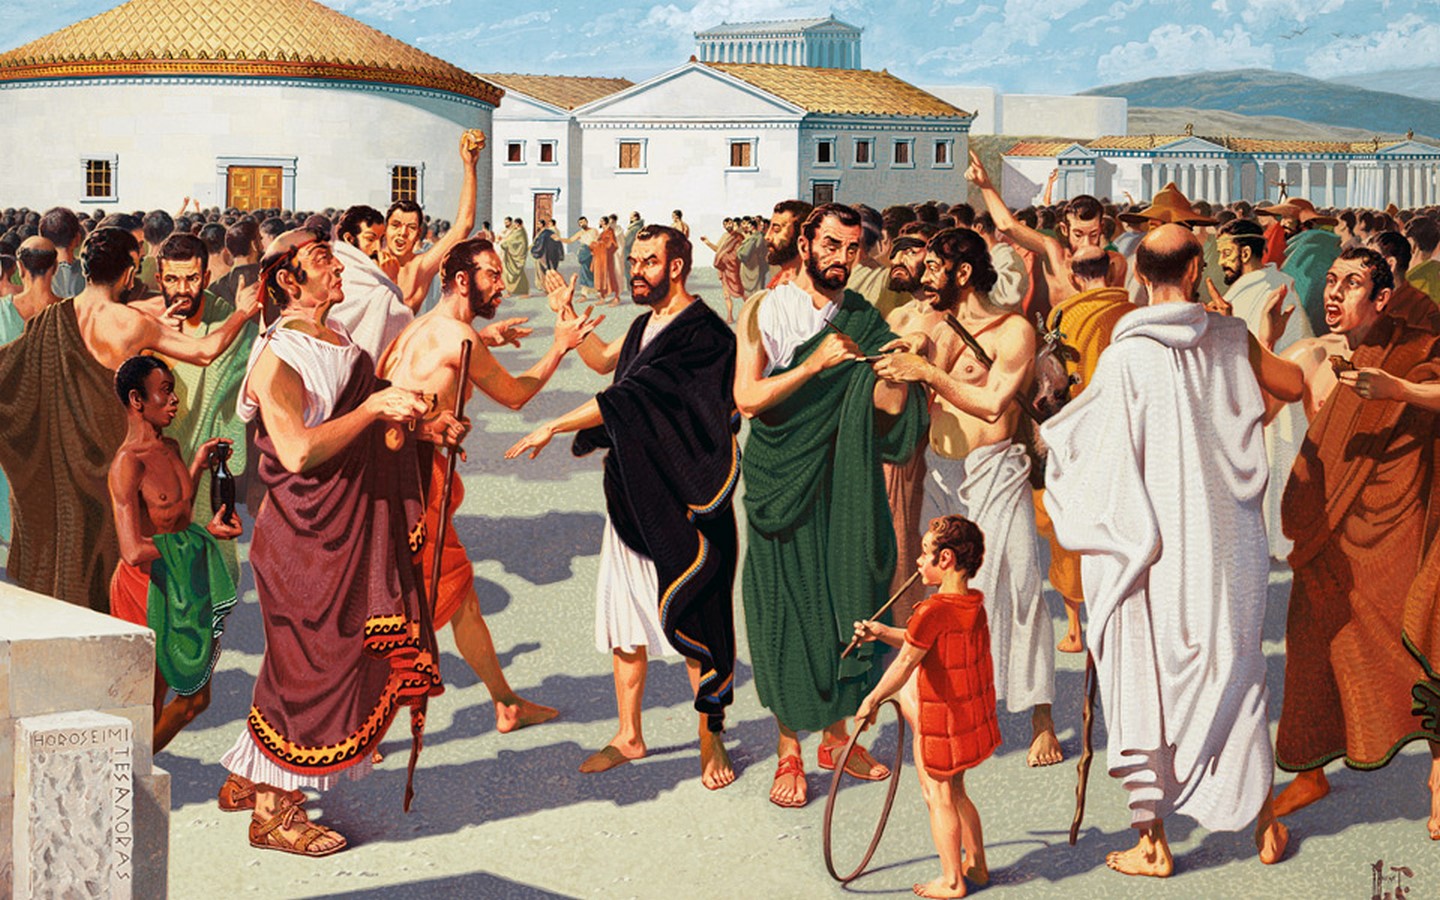 Greek culture and family